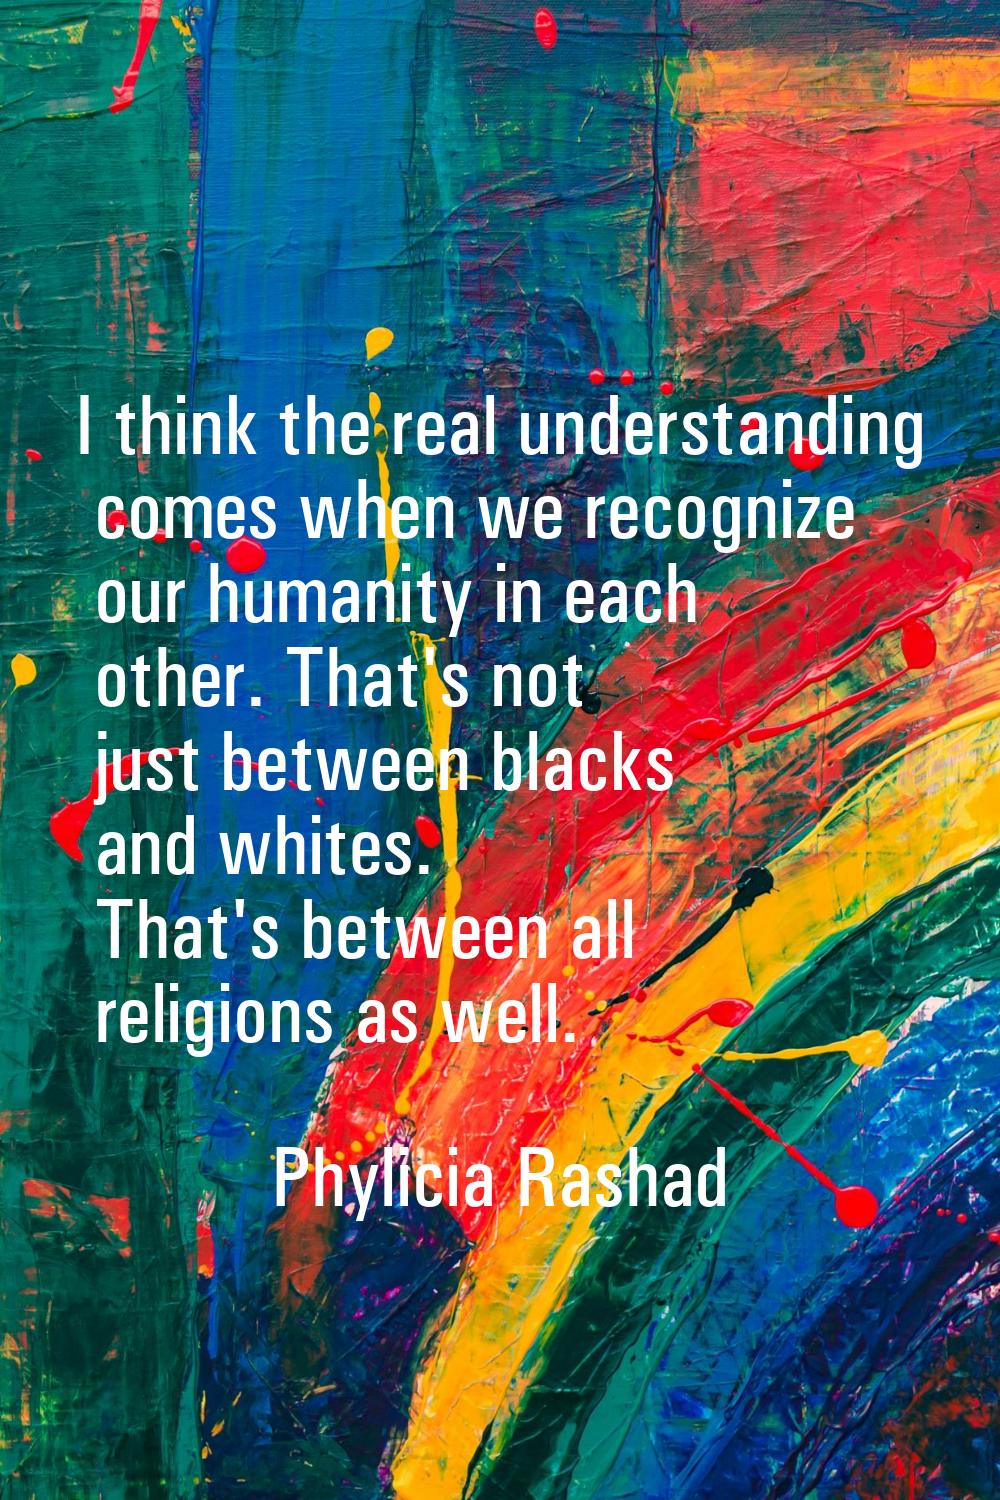 I think the real understanding comes when we recognize our humanity in each other. That's not just 